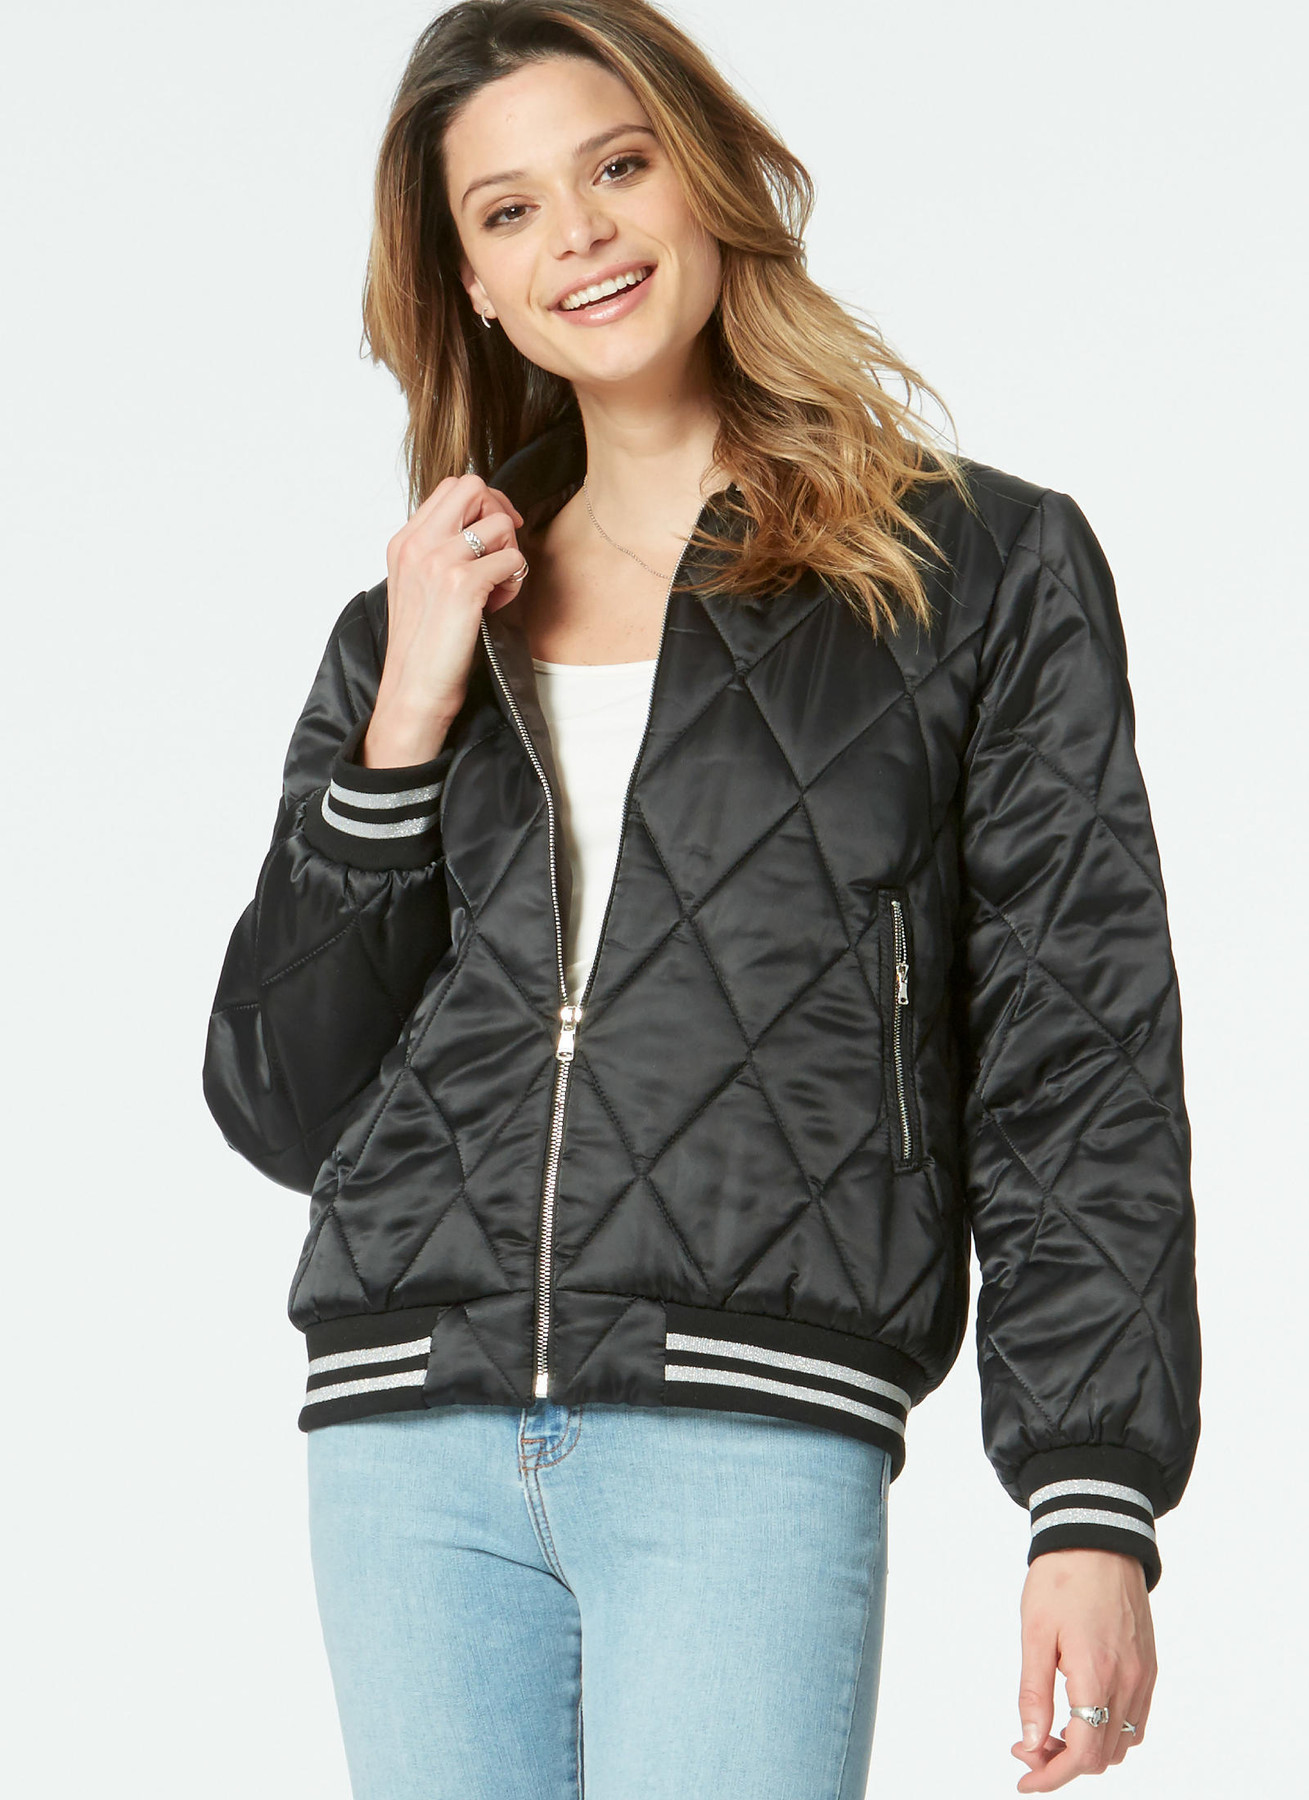 M7637 | Misses' and Men's Bomber Jackets | McCall's Patterns